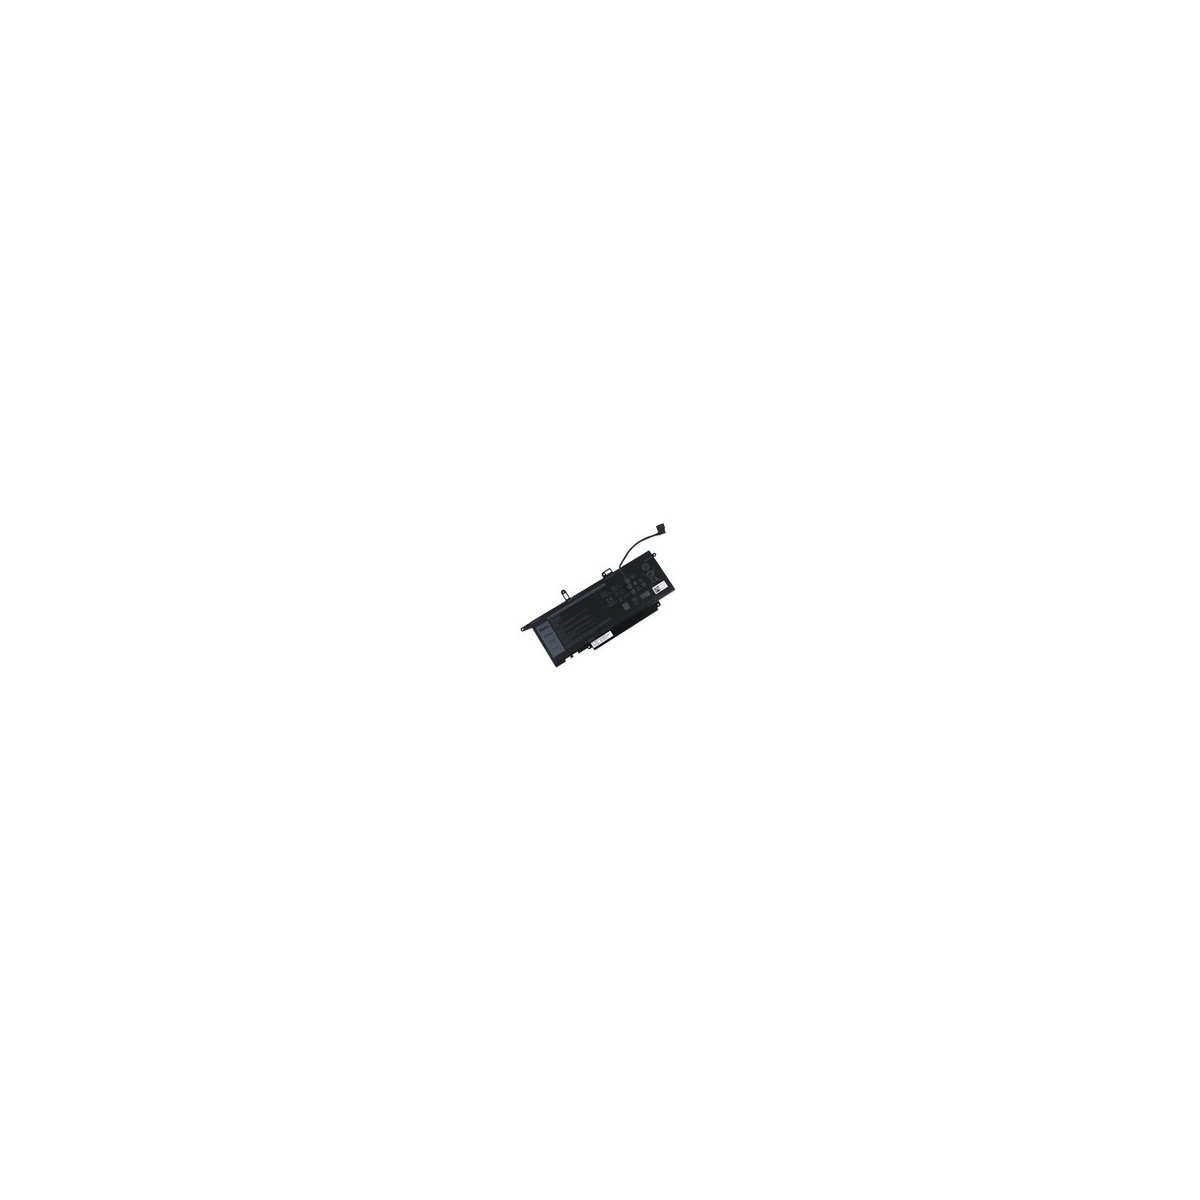 DELL BATTERY LAT 7400 2-IN-1 4C-4C 52WHR OEM: CHWV6